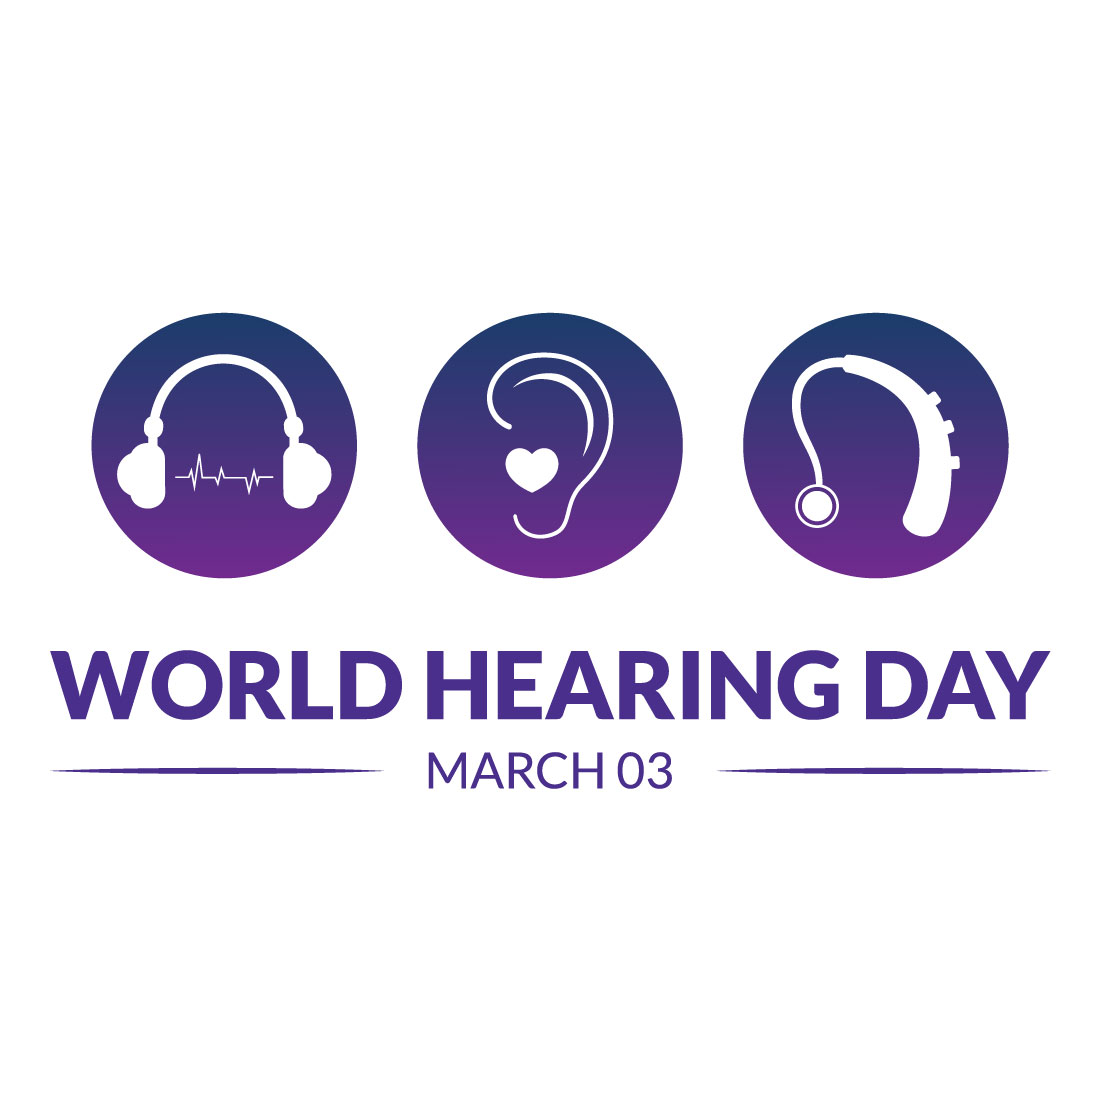 12 World Hearing Day Illustration cover.